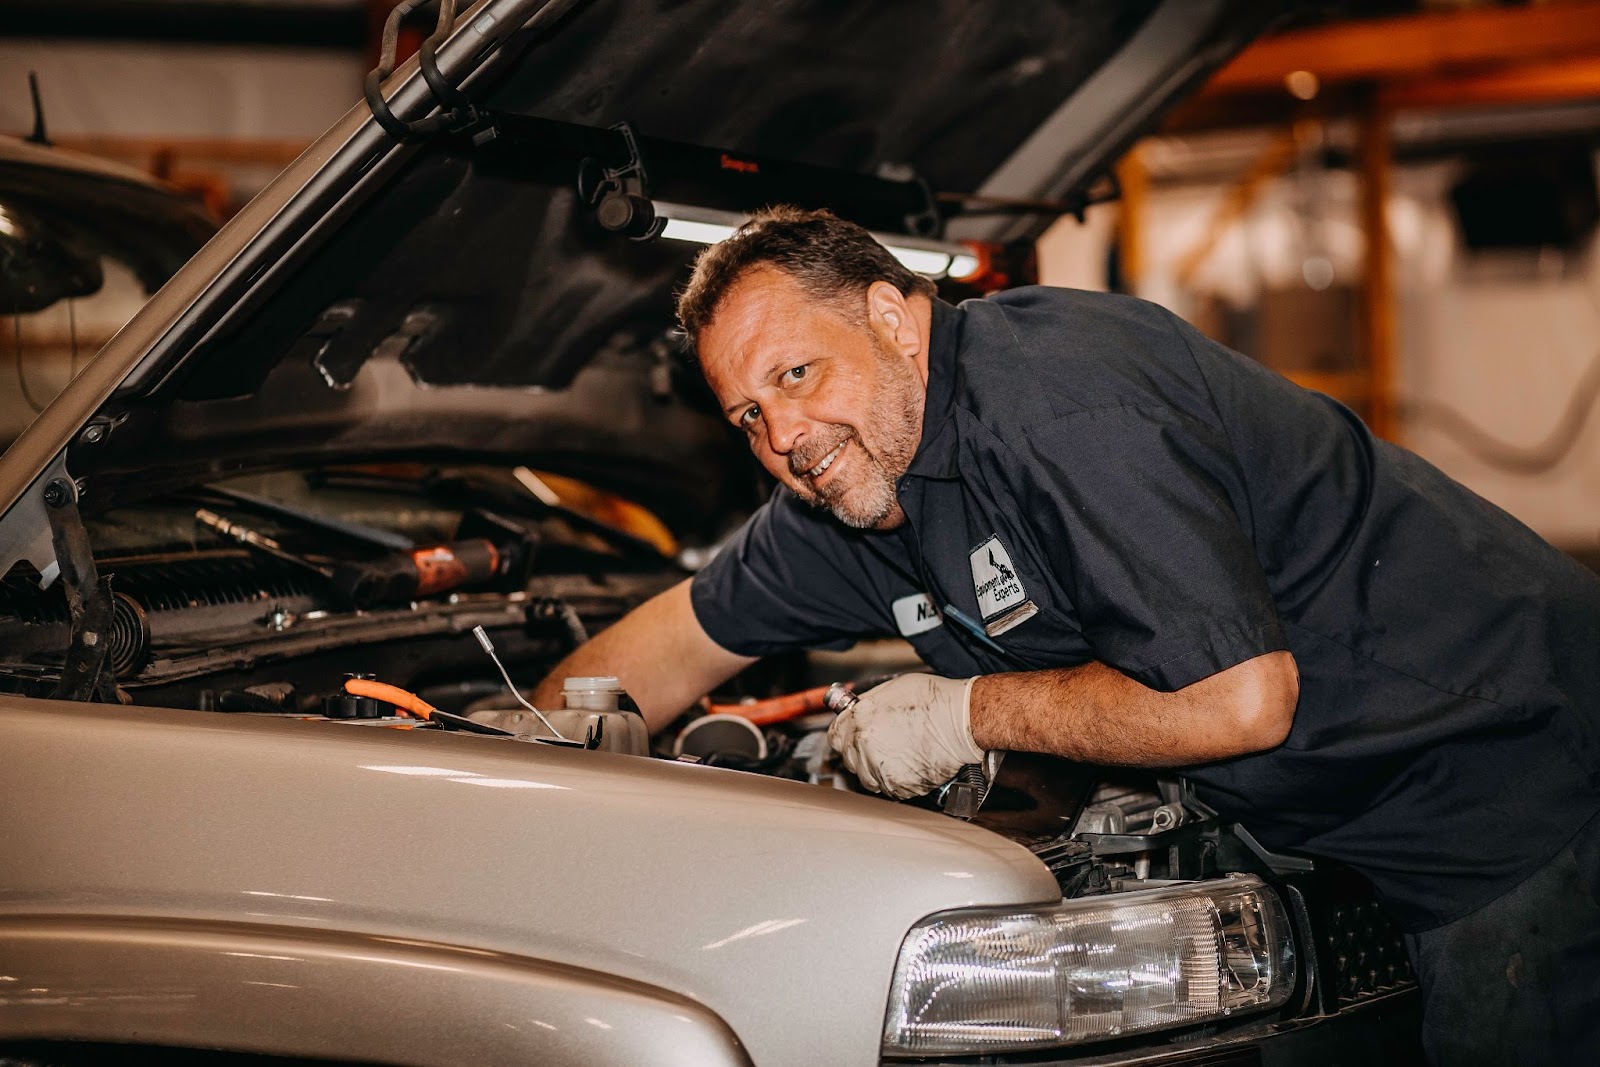 An Equipment Experts employee smiling at the camera while working on the inside of a Ford pickup truck